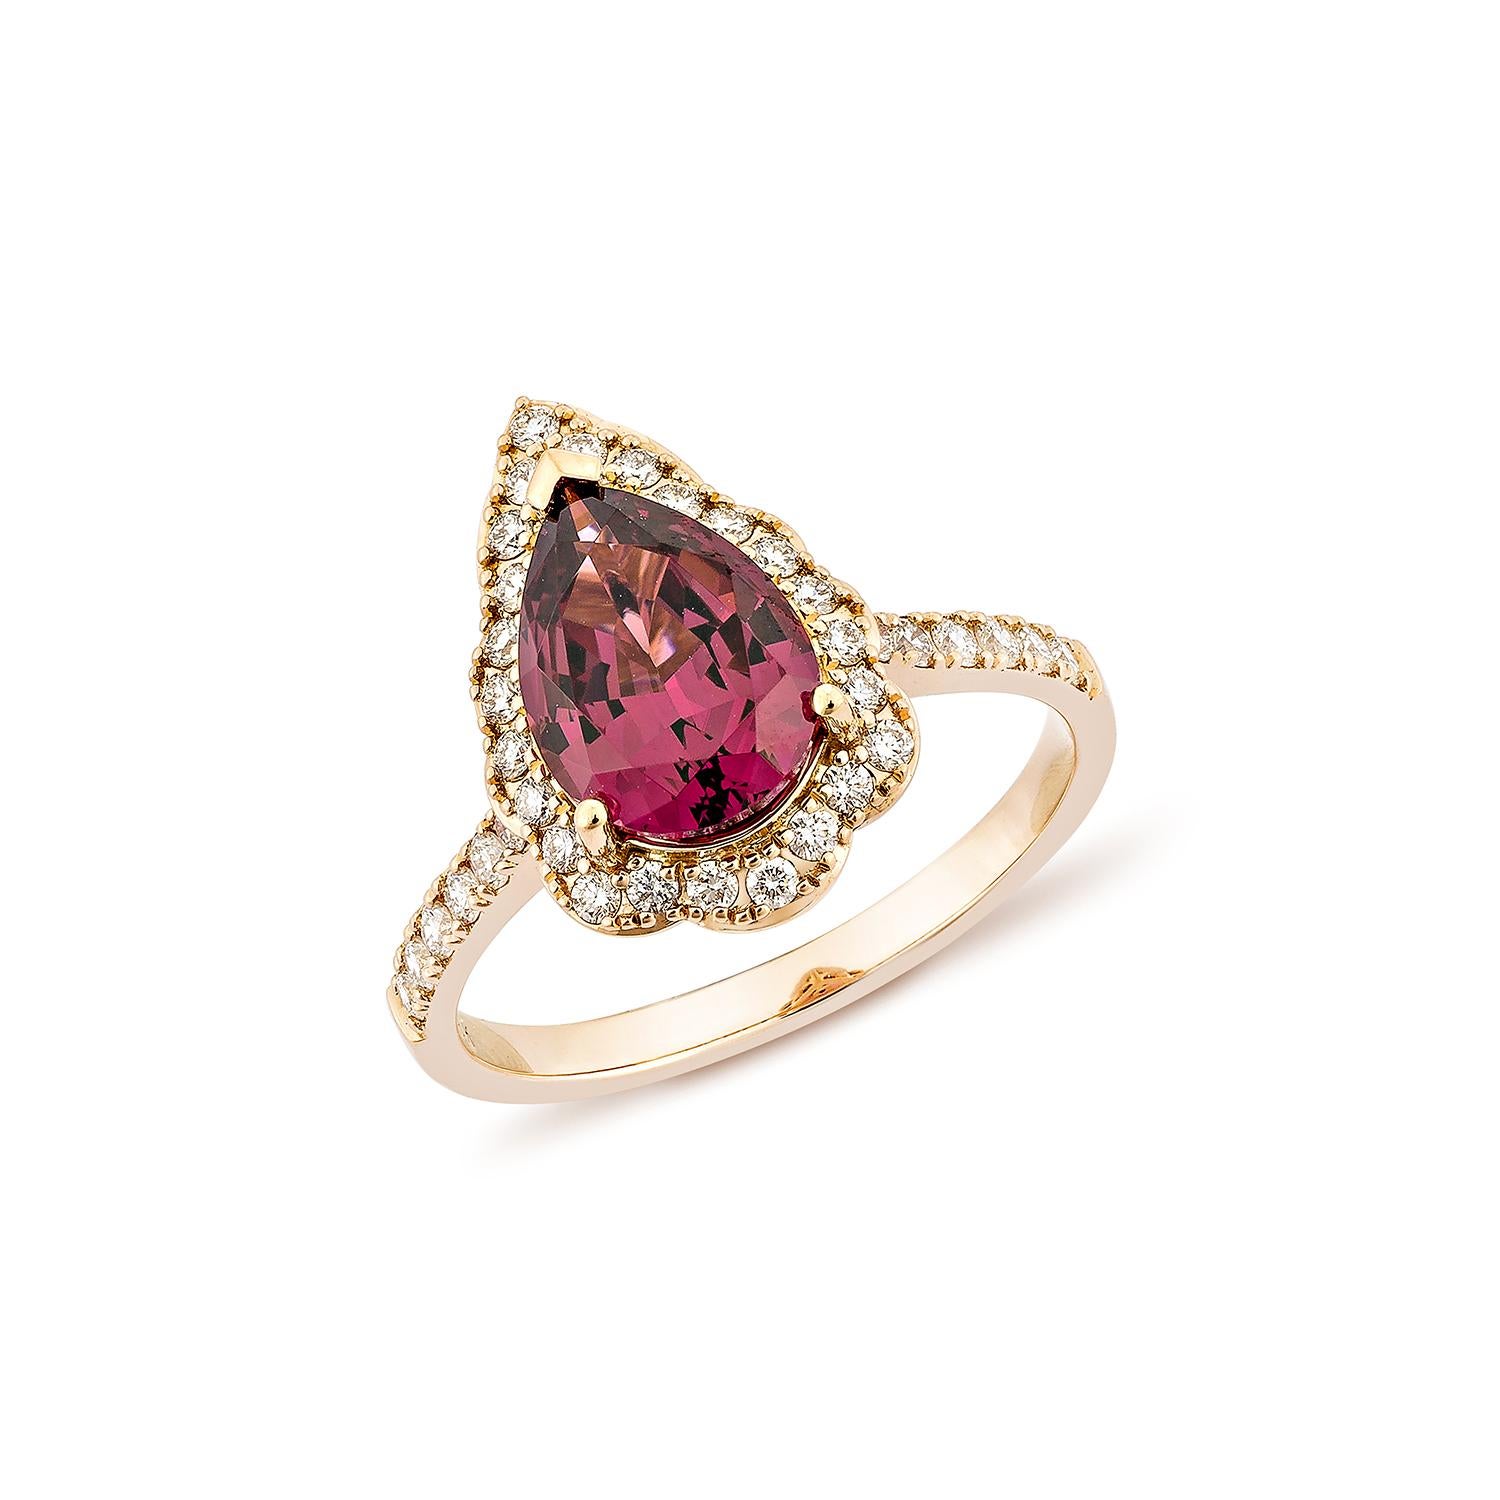 Contemporary 2.31 Carat Rhodolite Fancy Ring in 18Karat Rose Gold with White Diamond.   For Sale